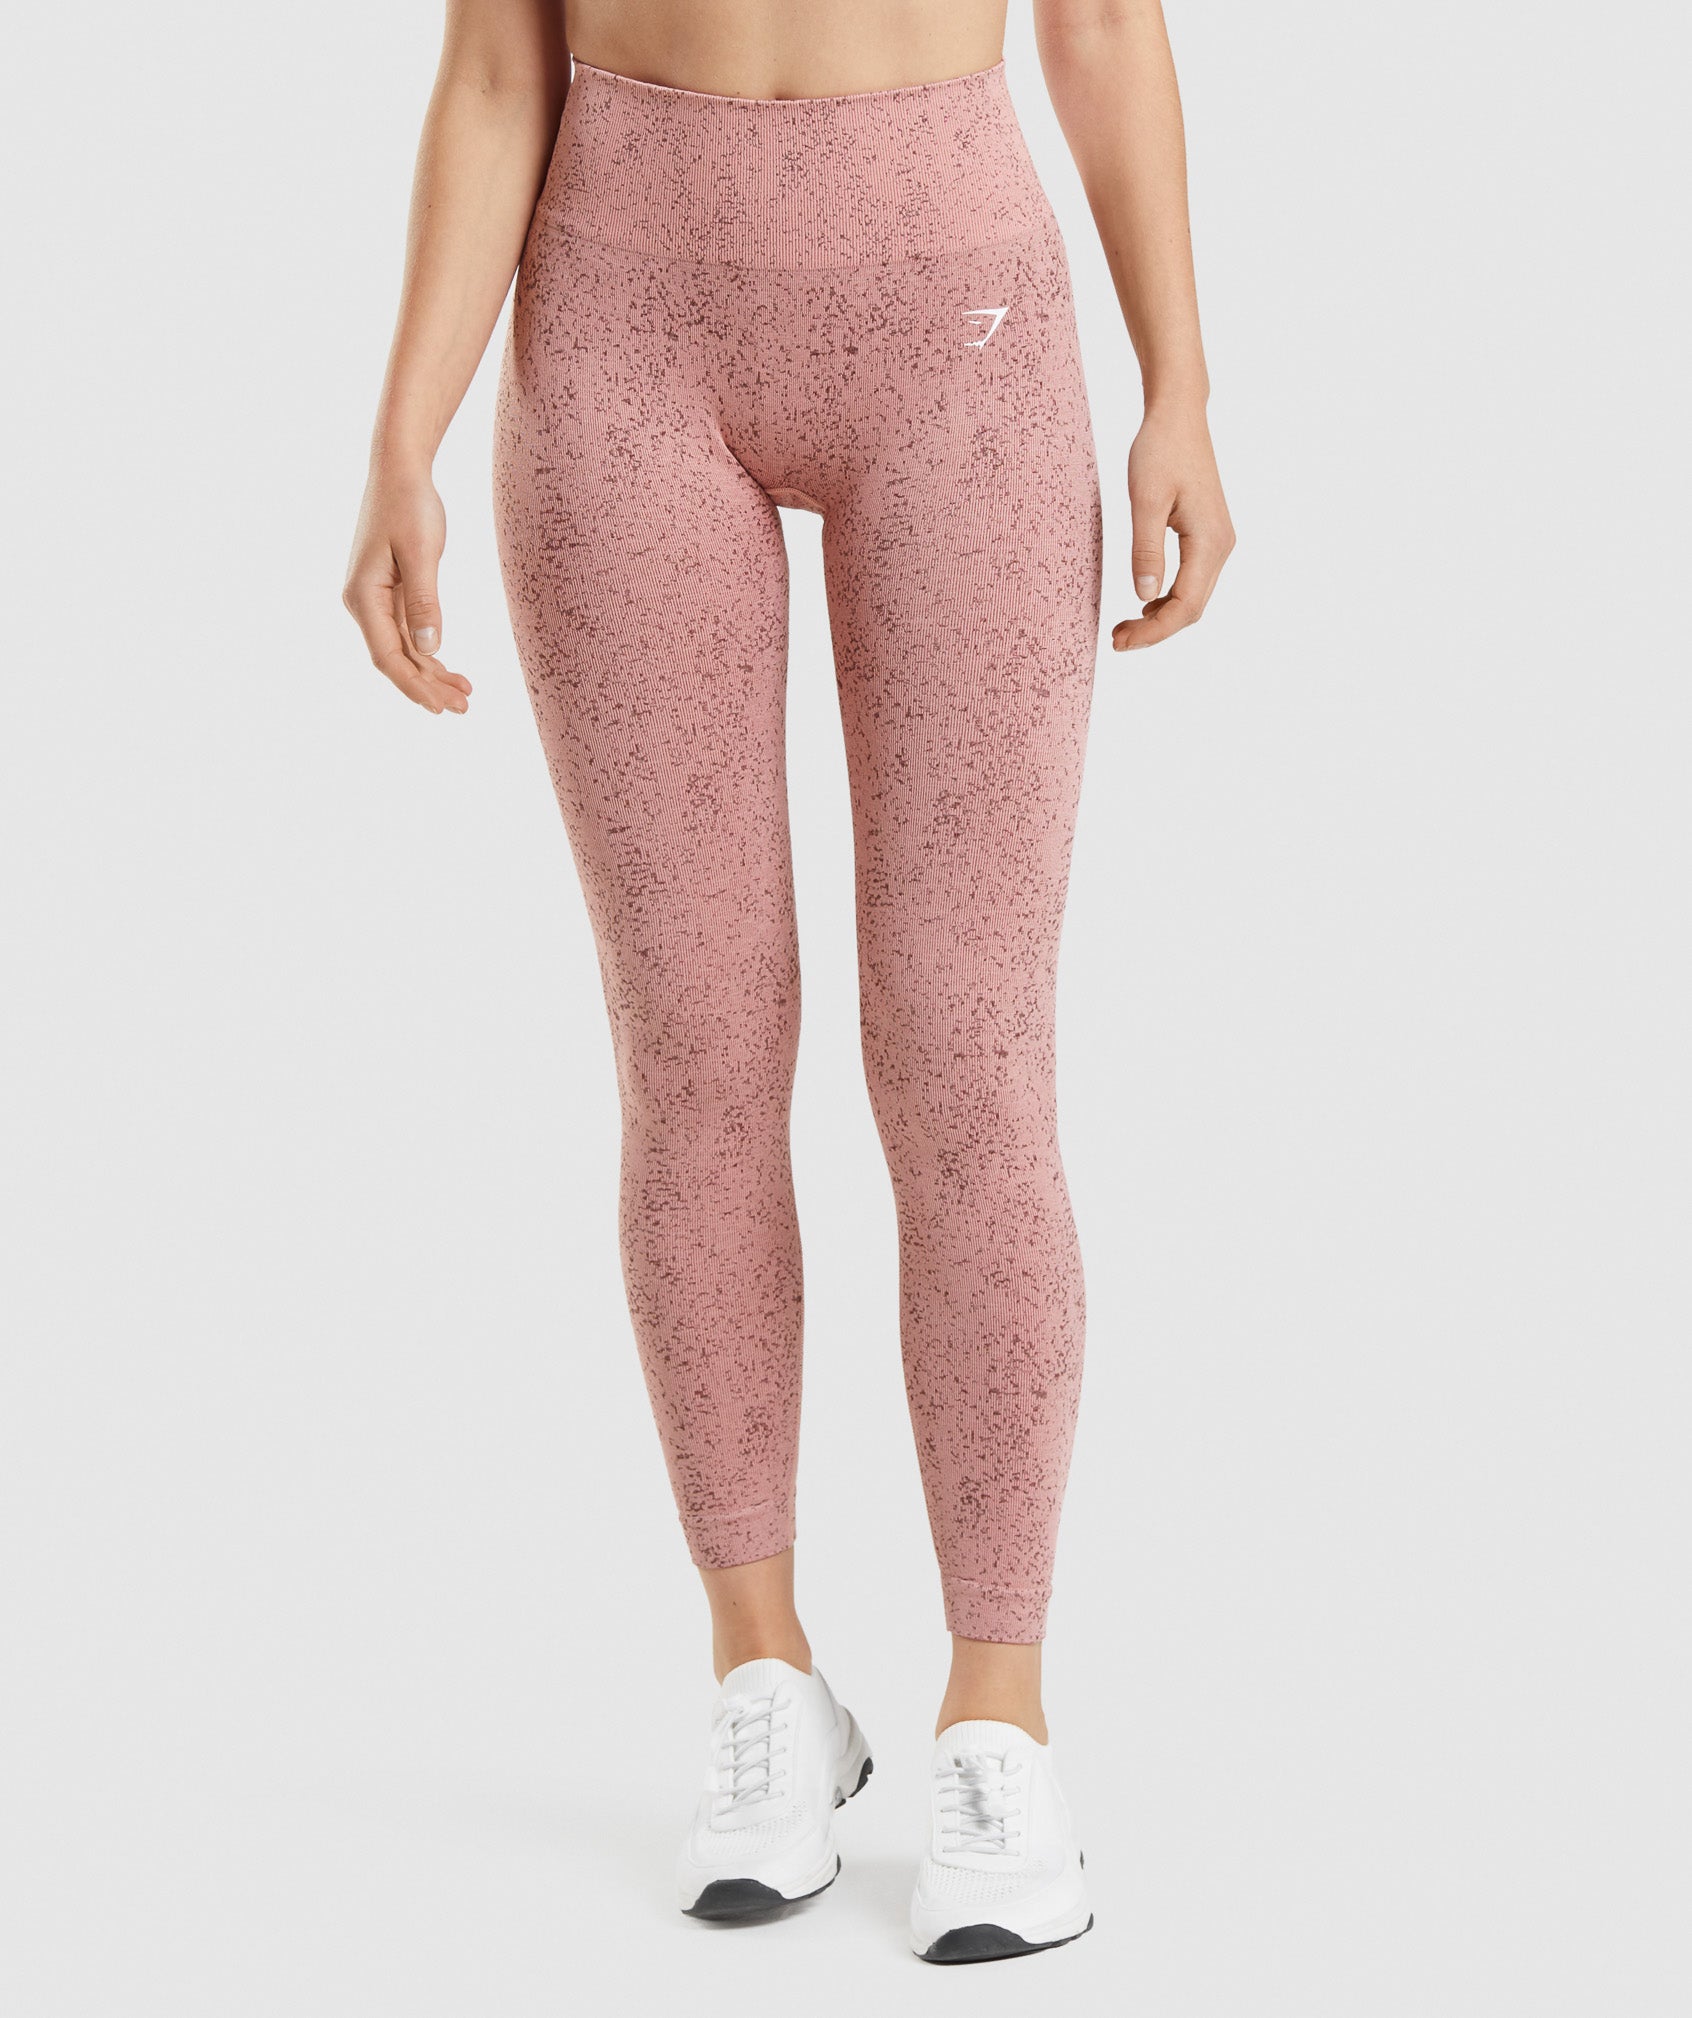 Adapt Fleck Seamless Leggings in Mineral | Paige Pink